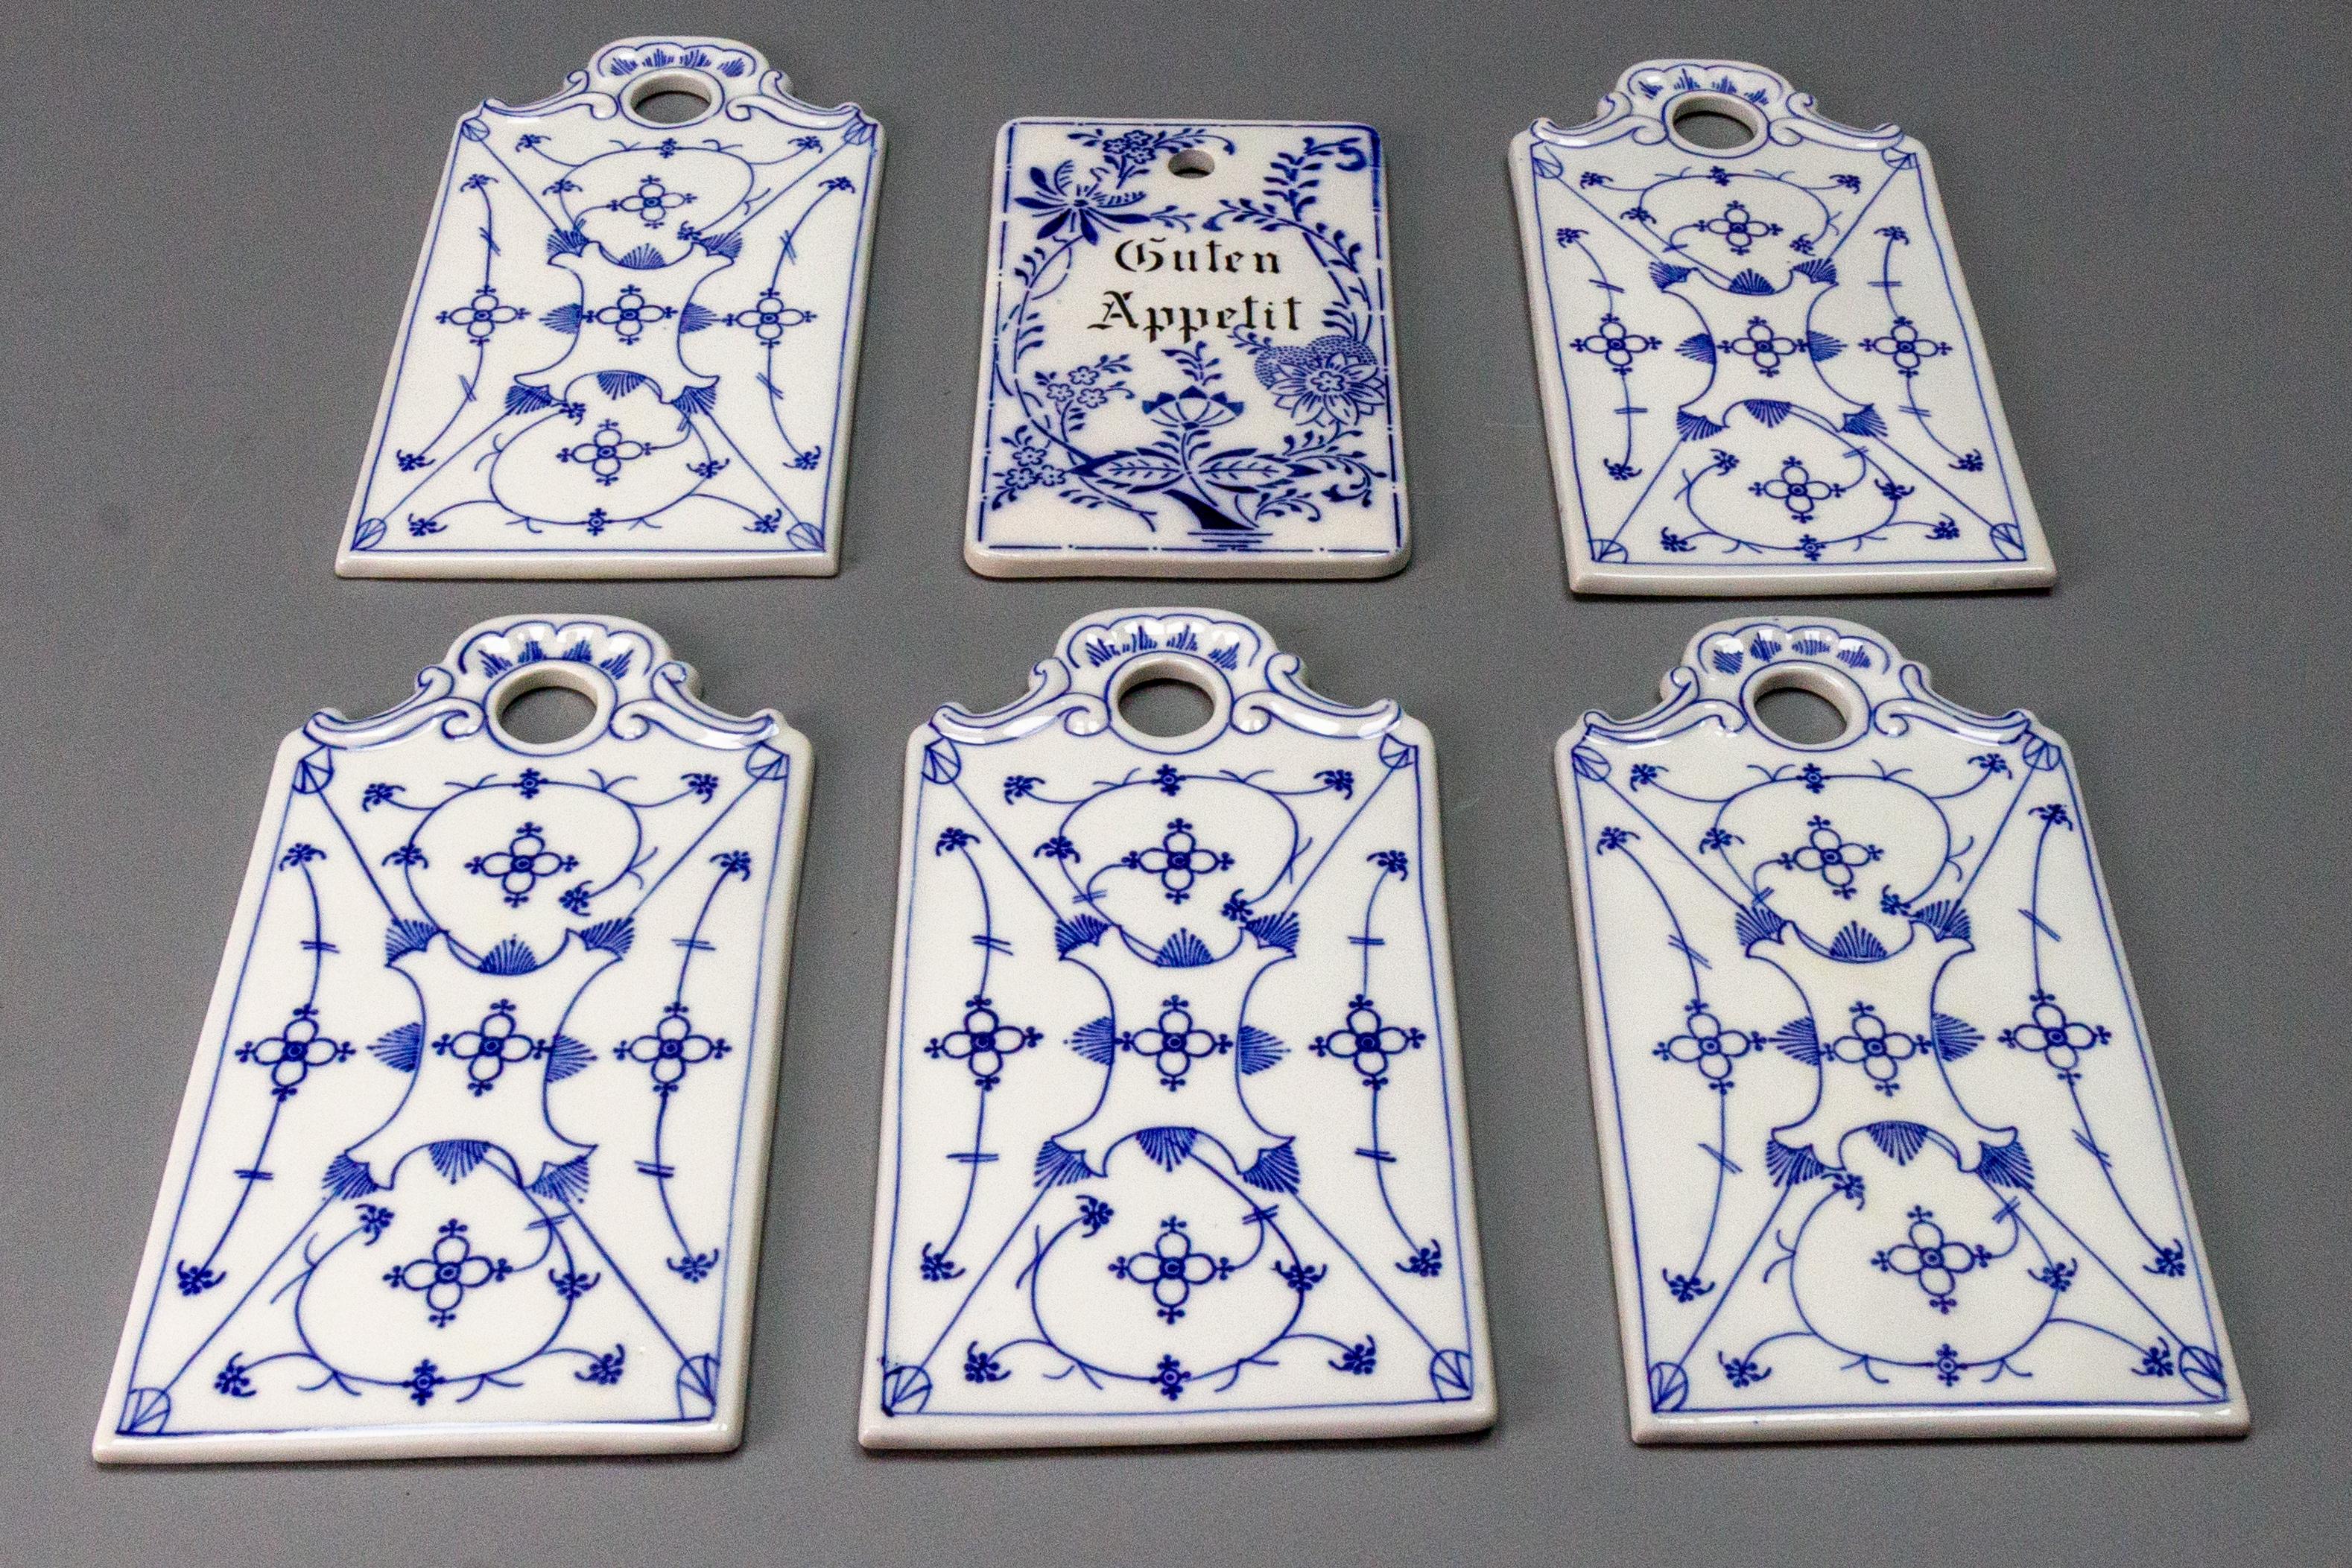 White and blue porcelain breakfast boards, set of six, Germany, circa the 1930s.
A beautiful set of six porcelain breakfast boards, butterboards, or breadboards. Five boards are decorated with a straw flower design, the sixt board is in blue onion